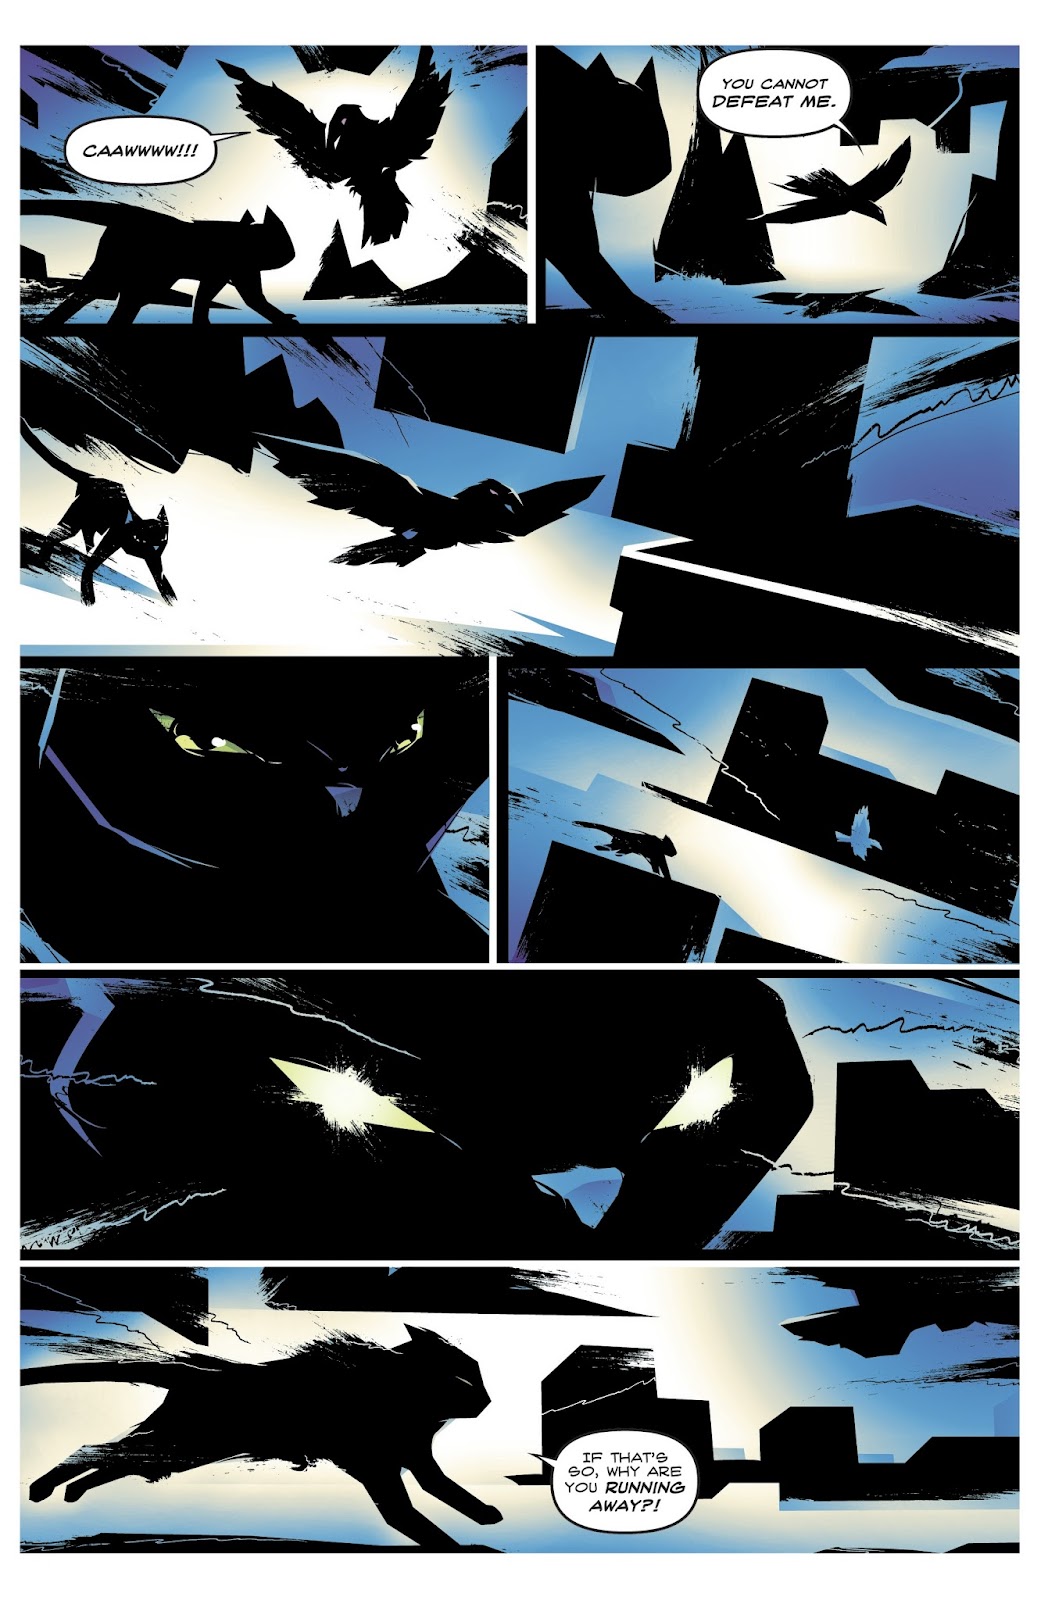 Hero Cats: Midnight Over Stellar City Vol. 2 issue 3 - Page 7